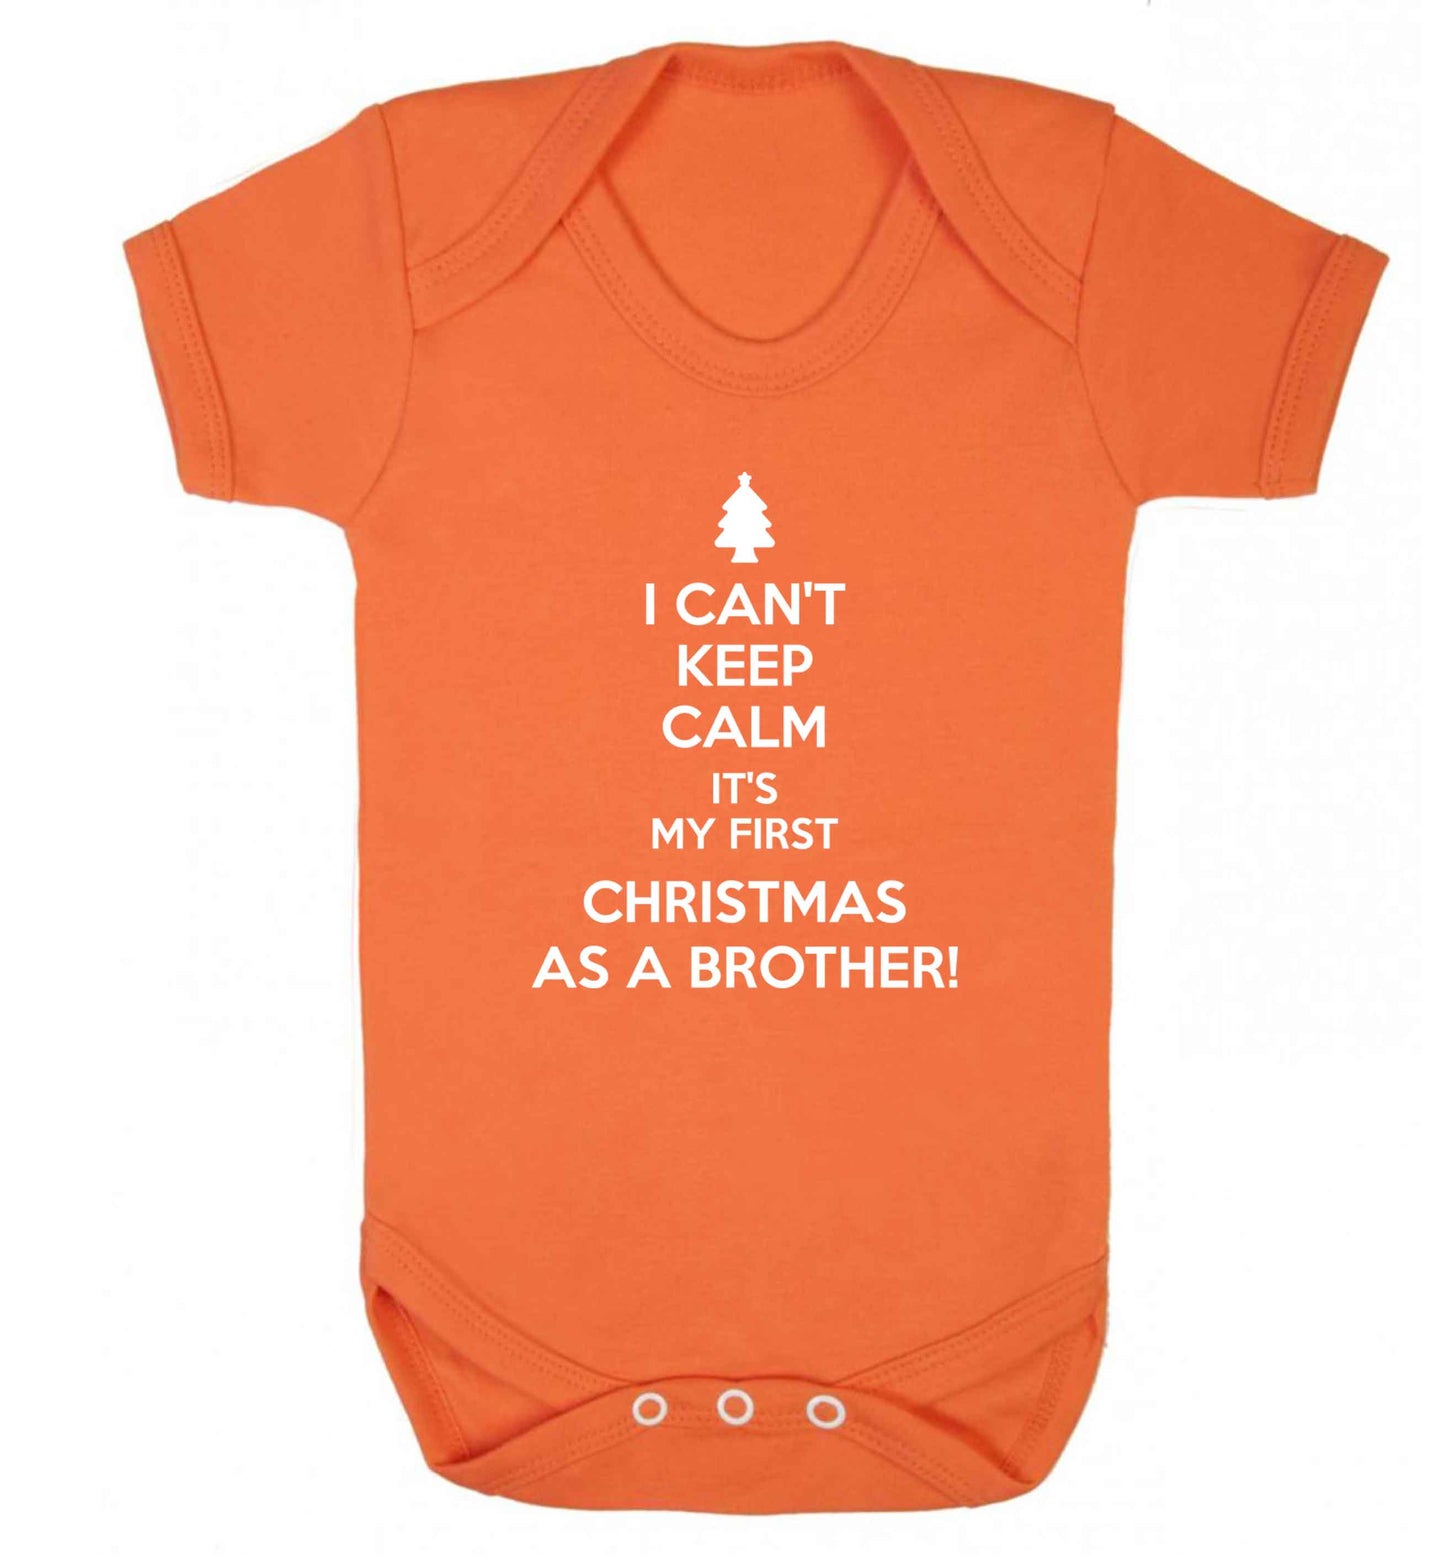 I can't keep calm it's my first Christmas as a brother! Baby Vest orange 18-24 months